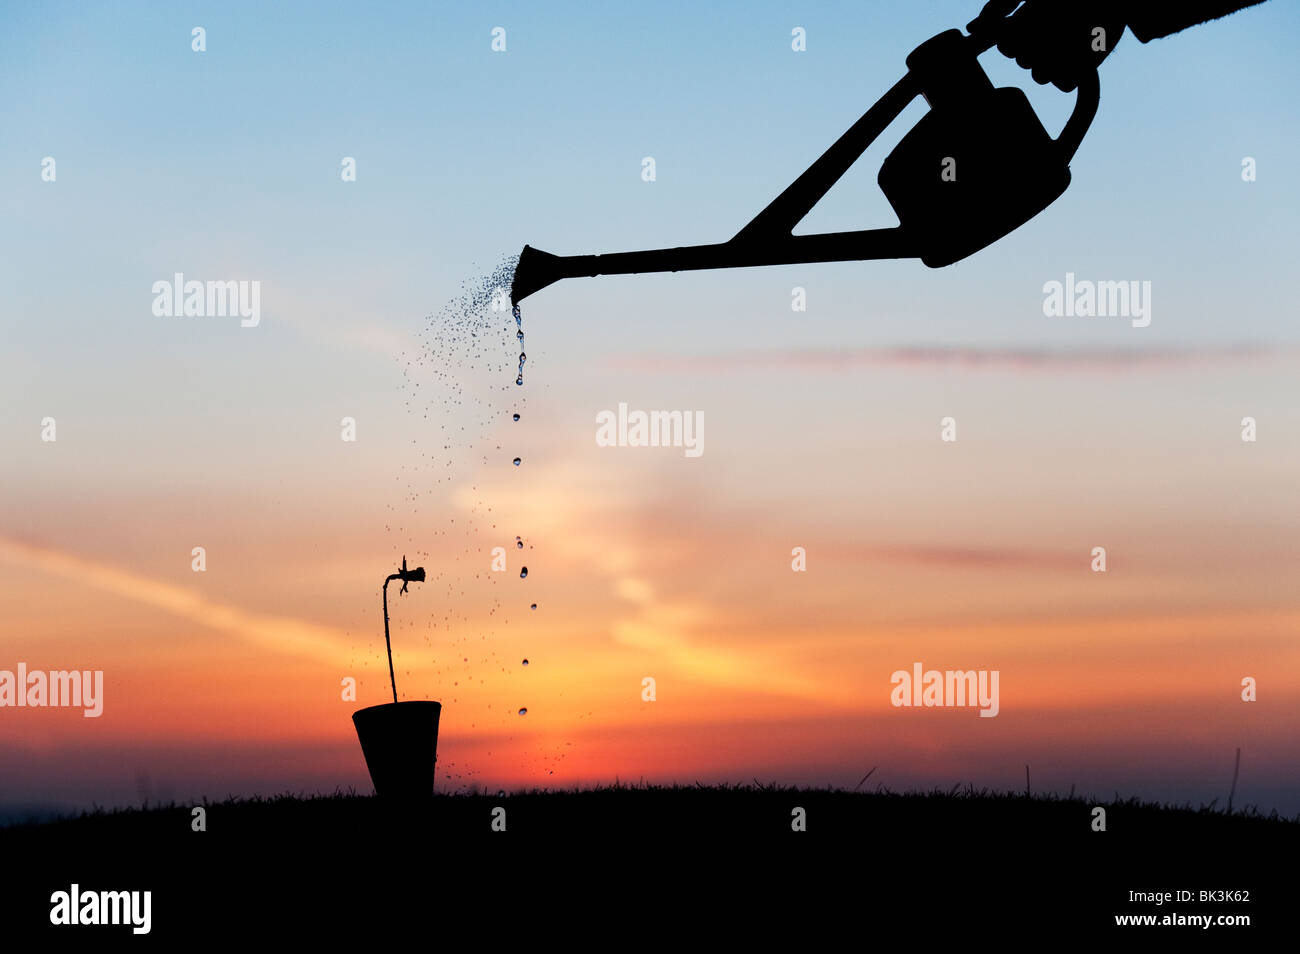 Watering a daffodil in a pot silhouette at sunrise Stock Photo